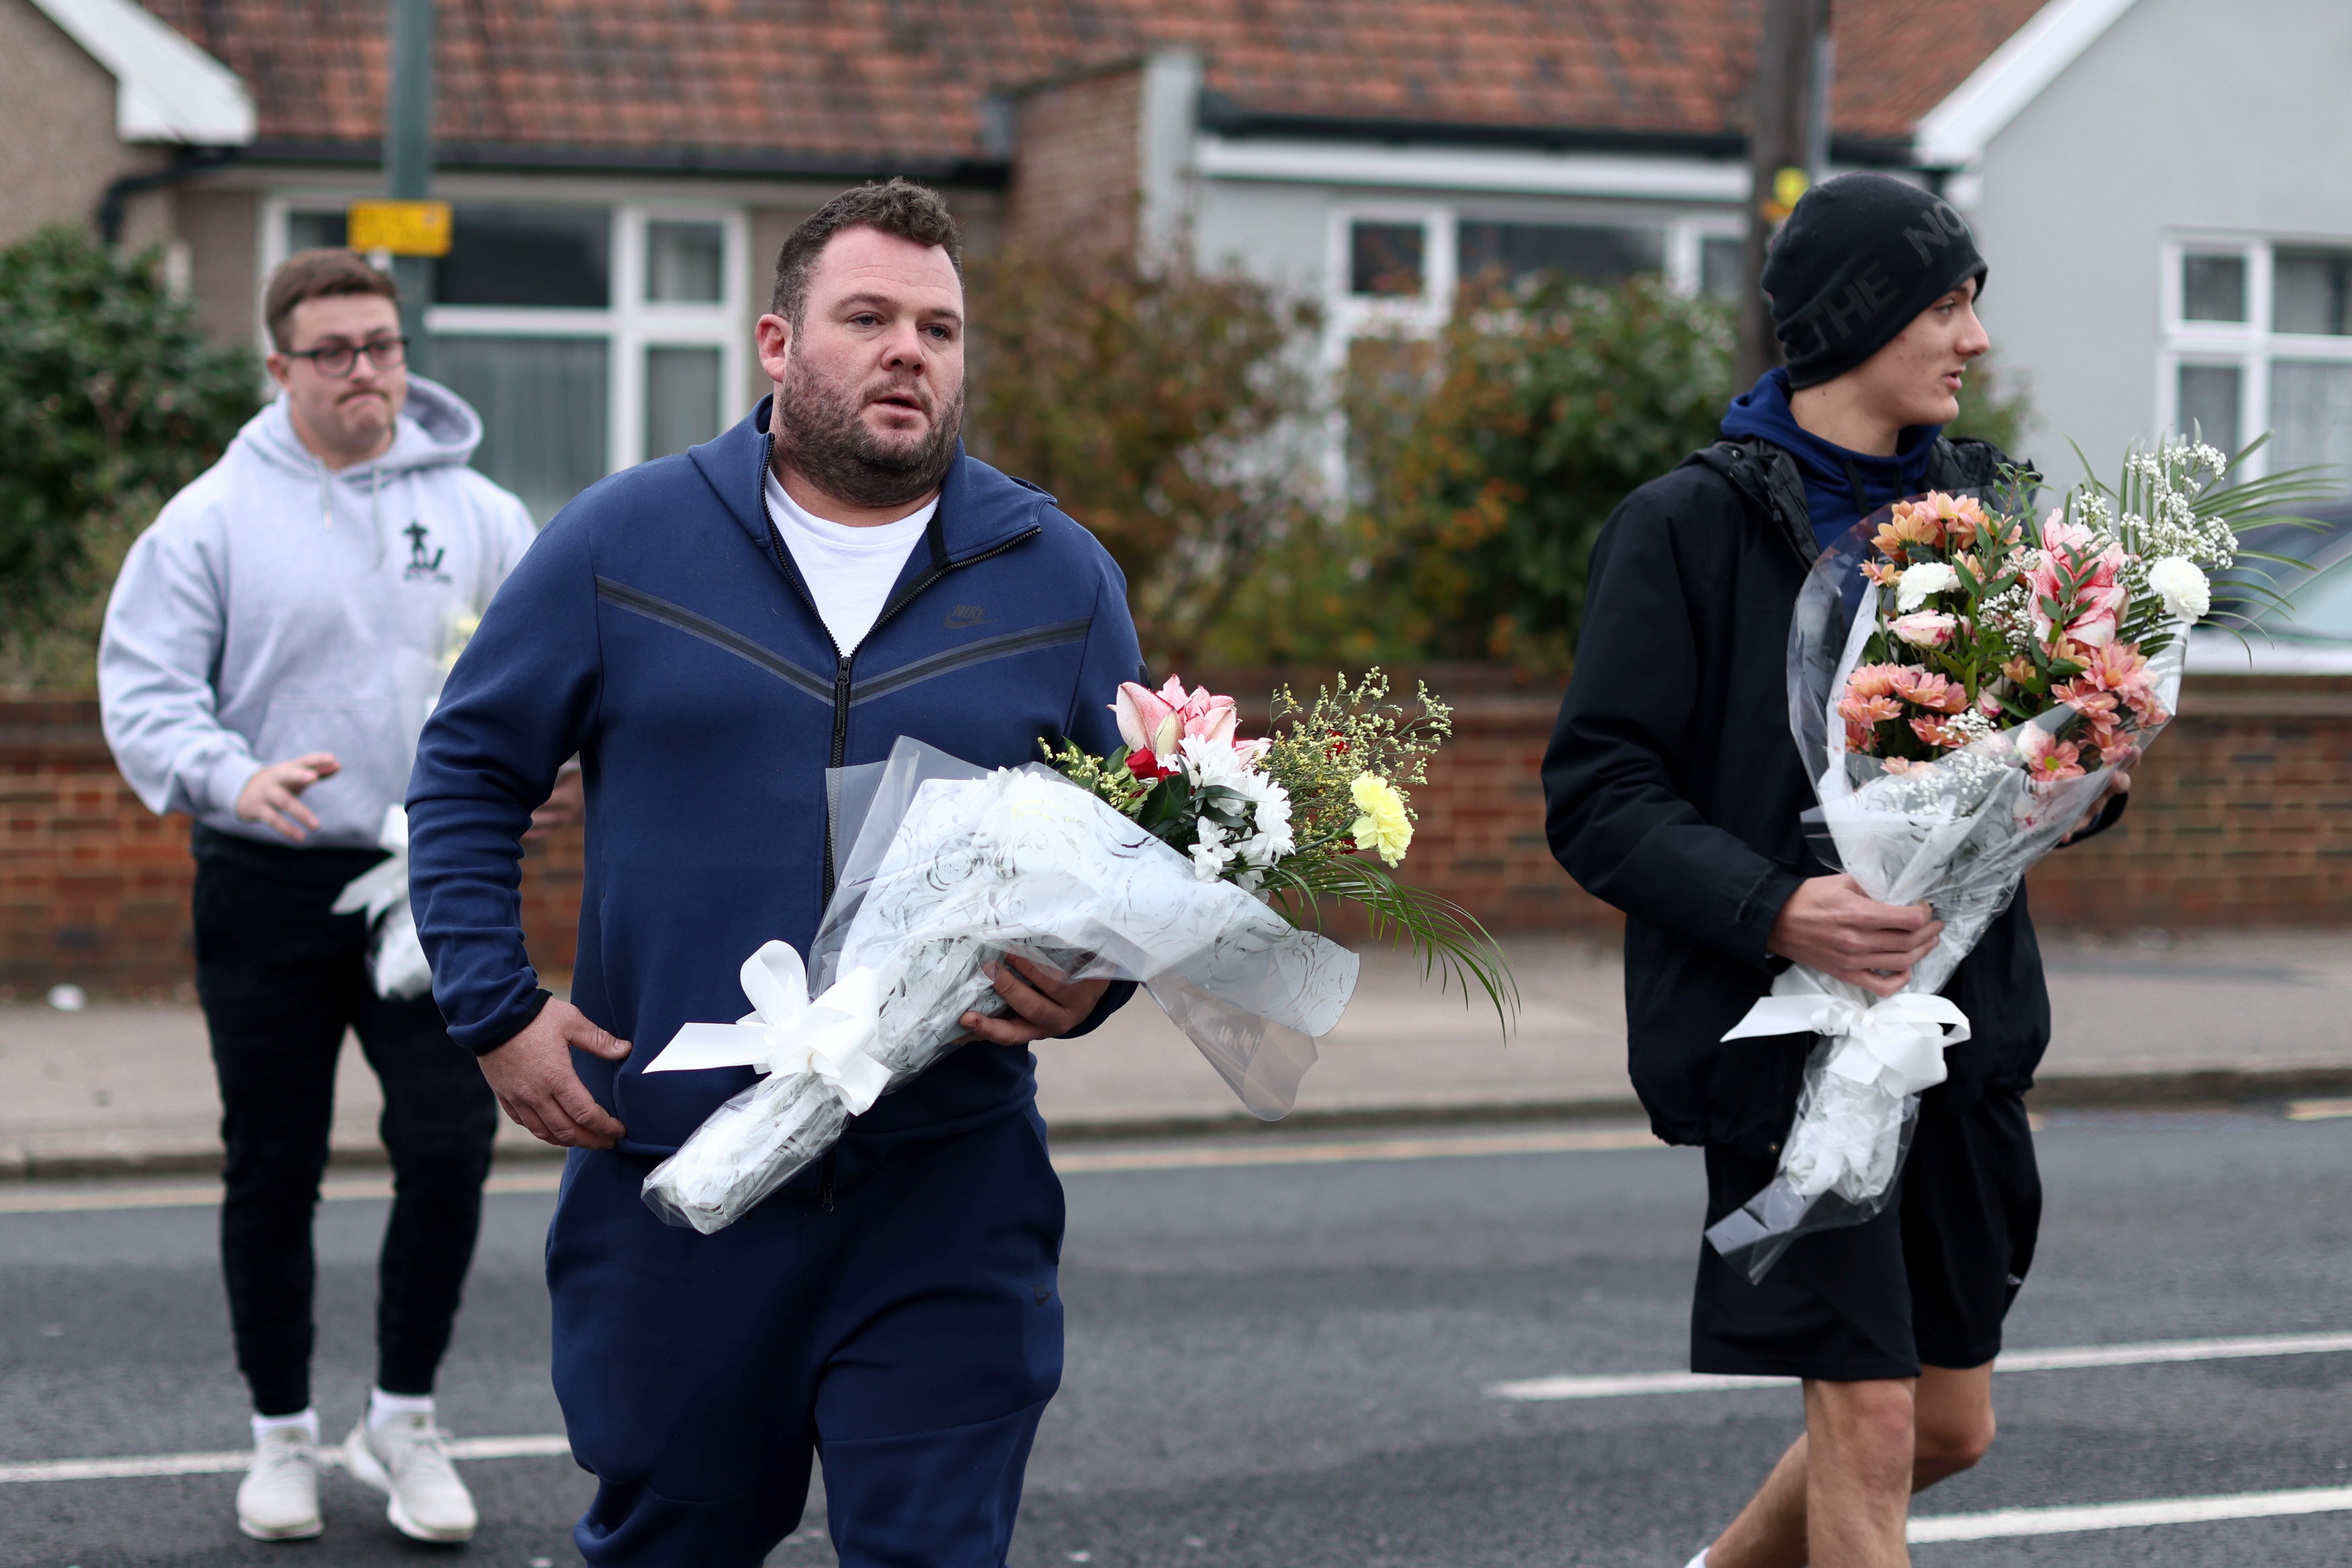 People carry flowers to lay at the scene of a house fire